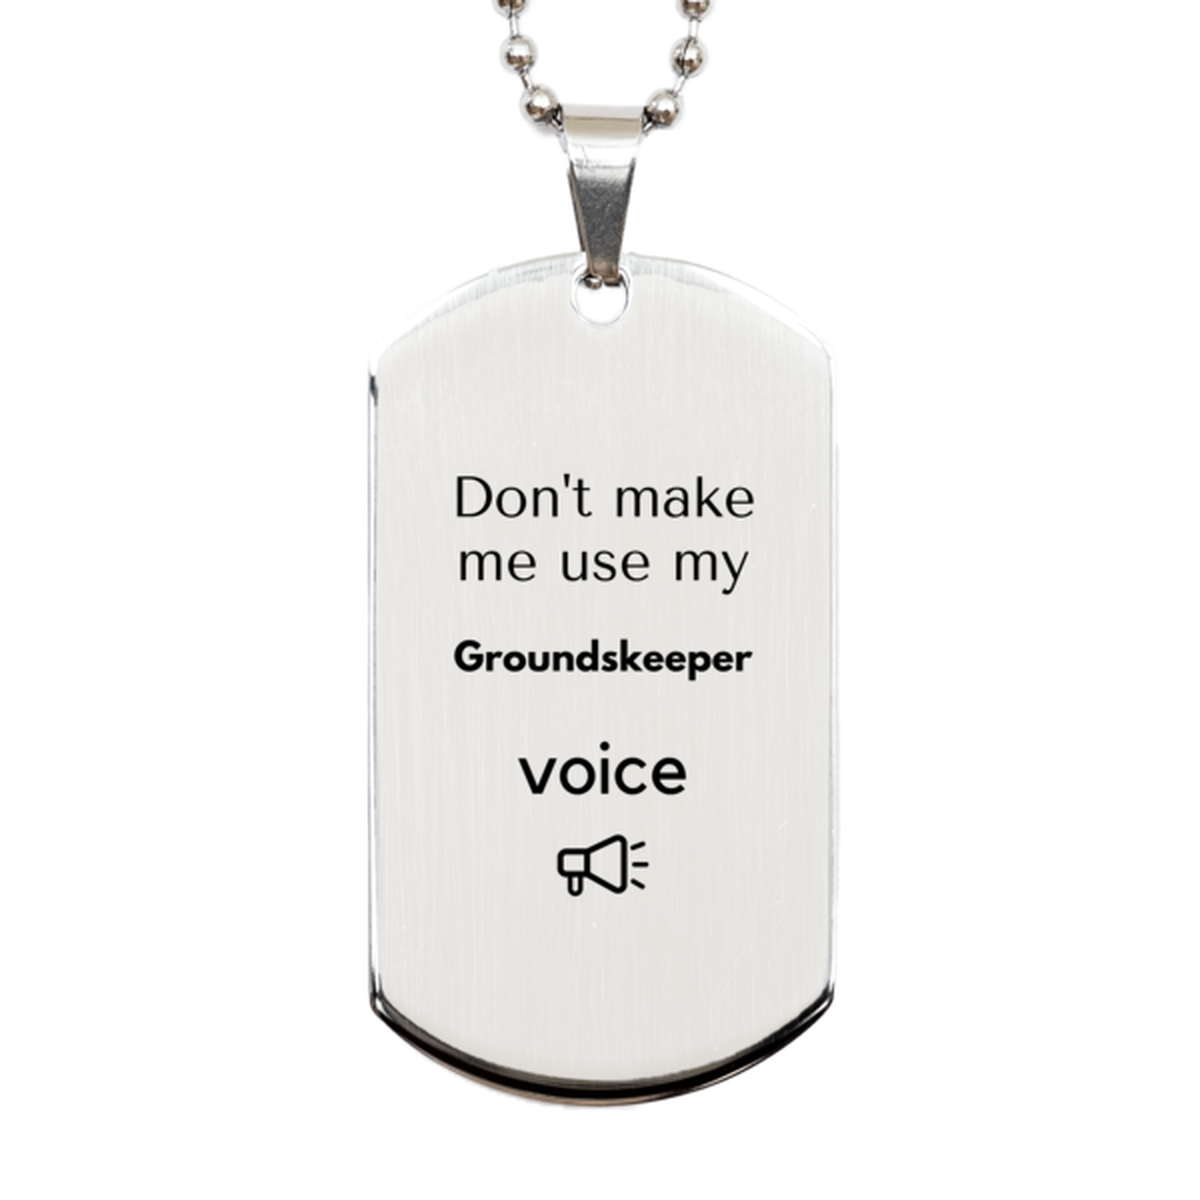 Don't make me use my Groundskeeper voice, Sarcasm Groundskeeper Gifts, Christmas Groundskeeper Silver Dog Tag Birthday Unique Gifts For Groundskeeper Coworkers, Men, Women, Colleague, Friends